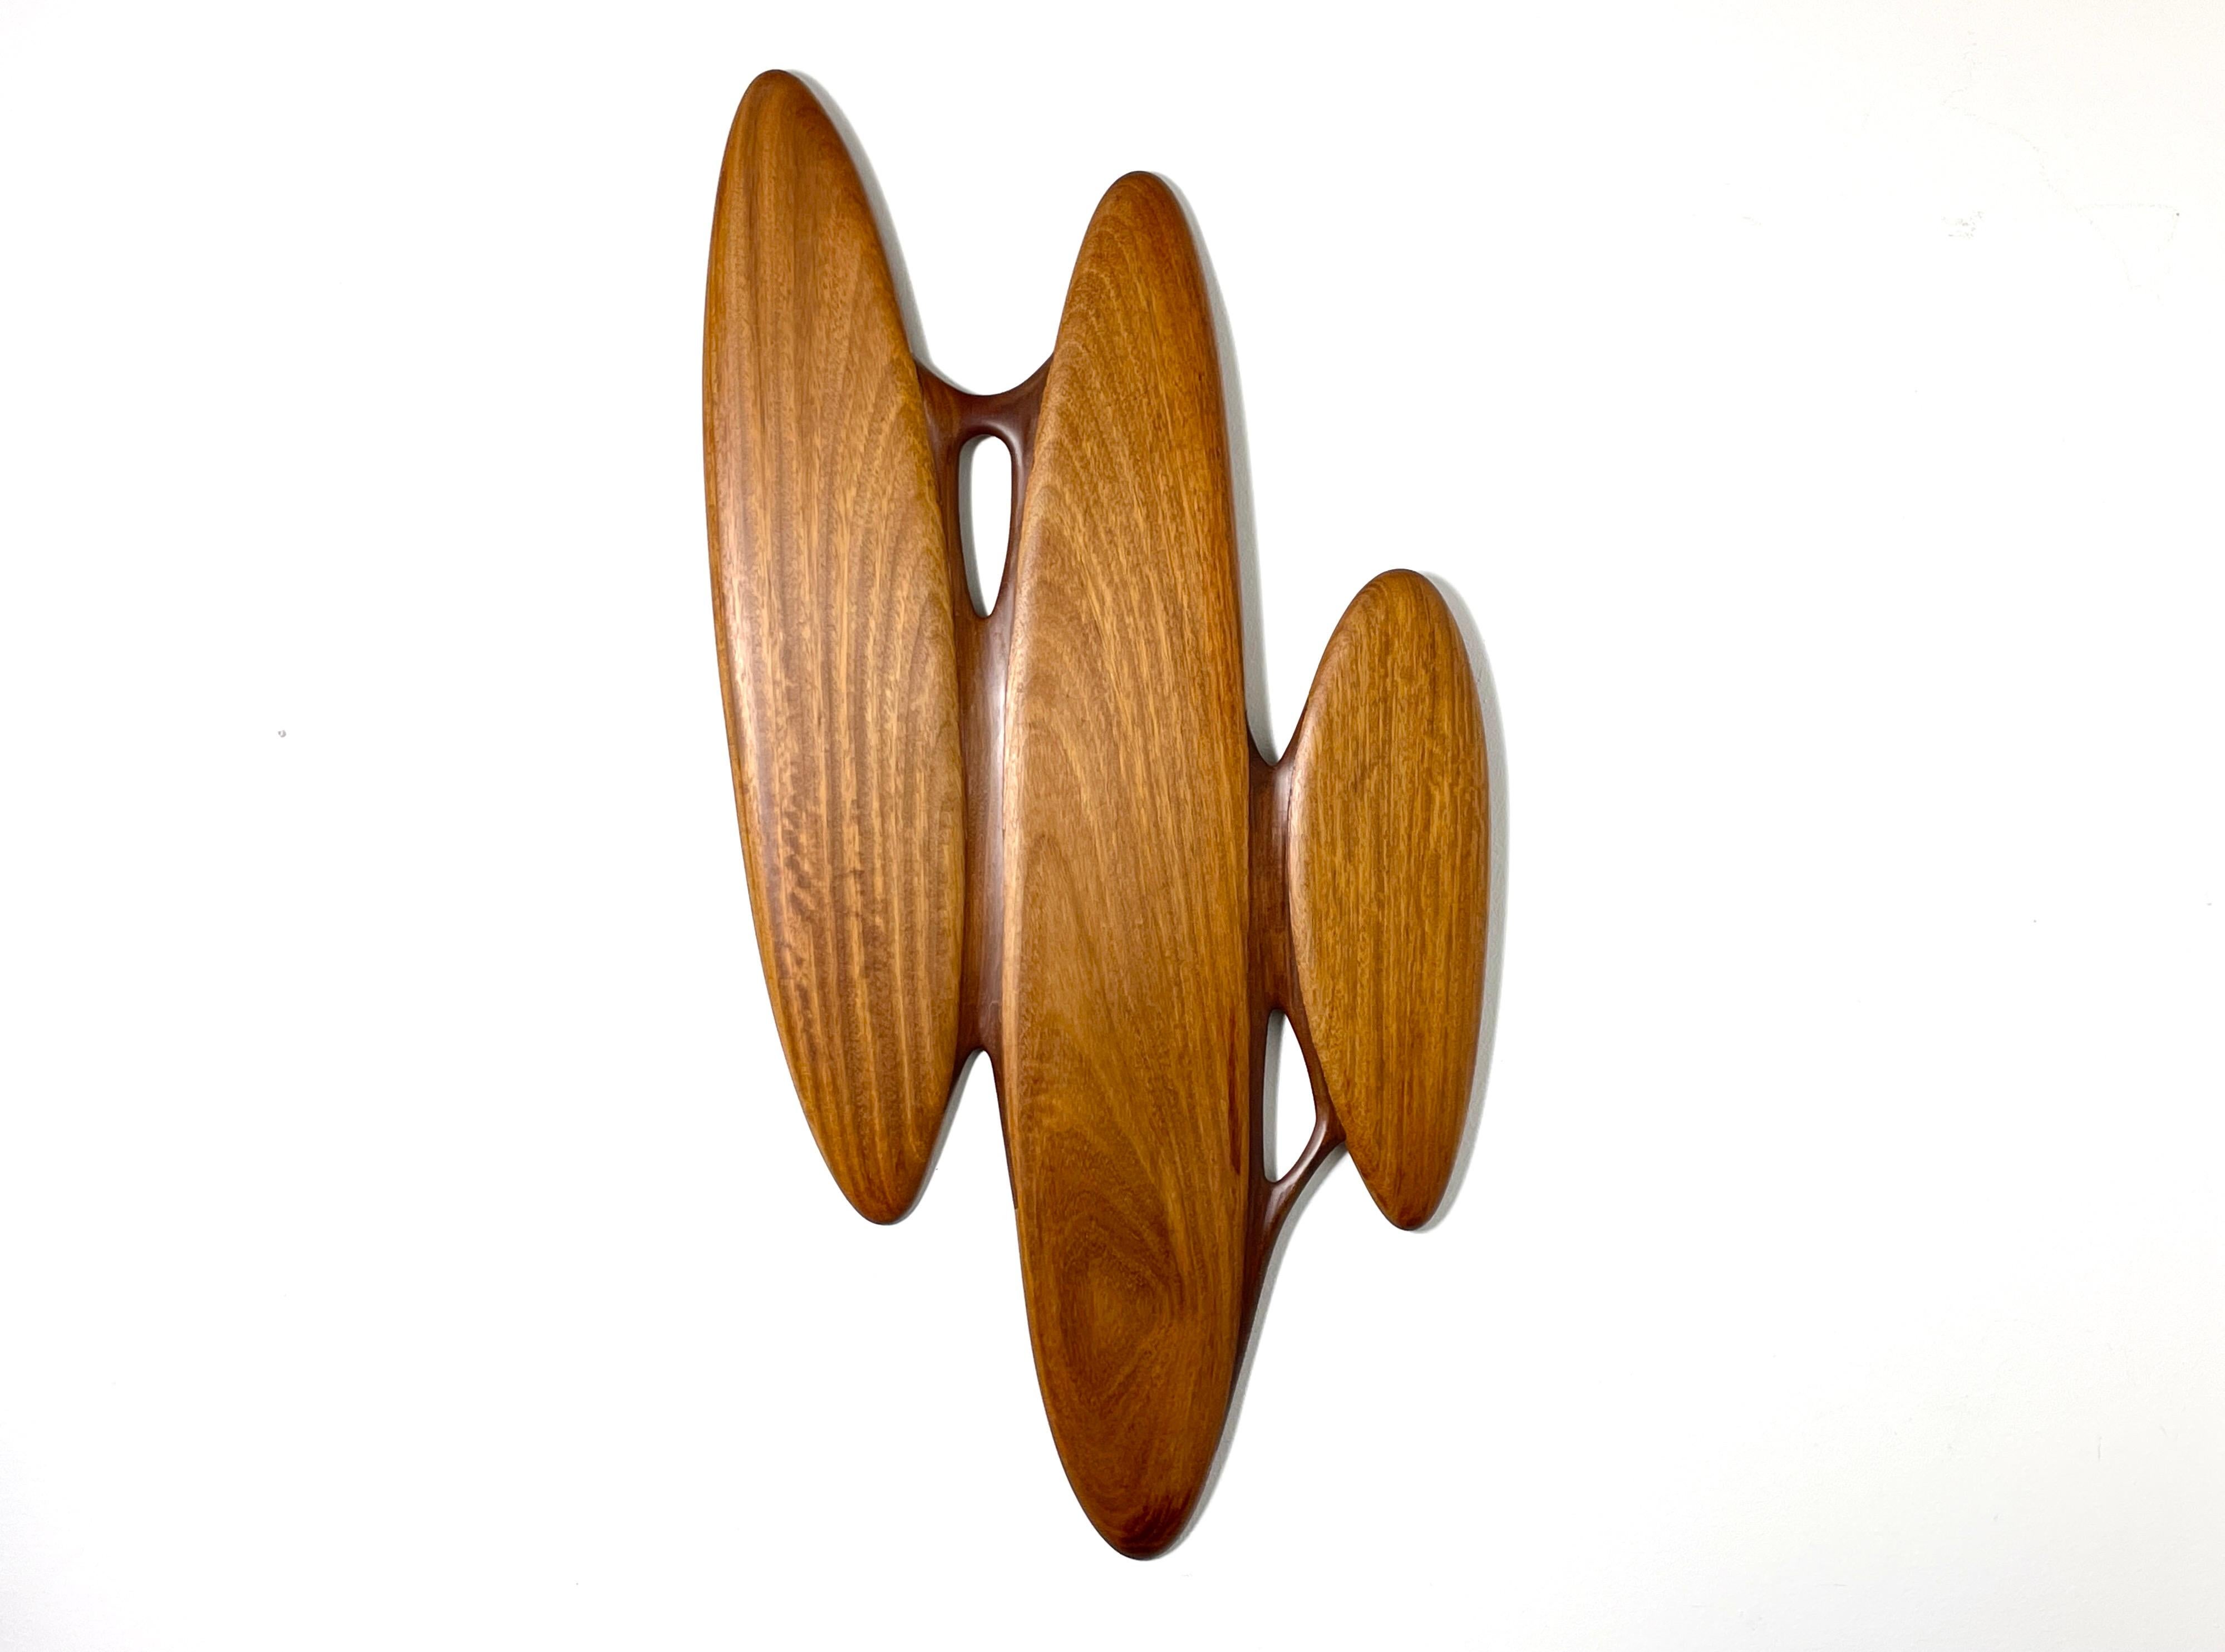 Vintage biomorphic American studio craft abstract wall sculpture
Modernist piece comprised of three oblong teak segments with sculpted joinery
Signed and dated A Boone 1982